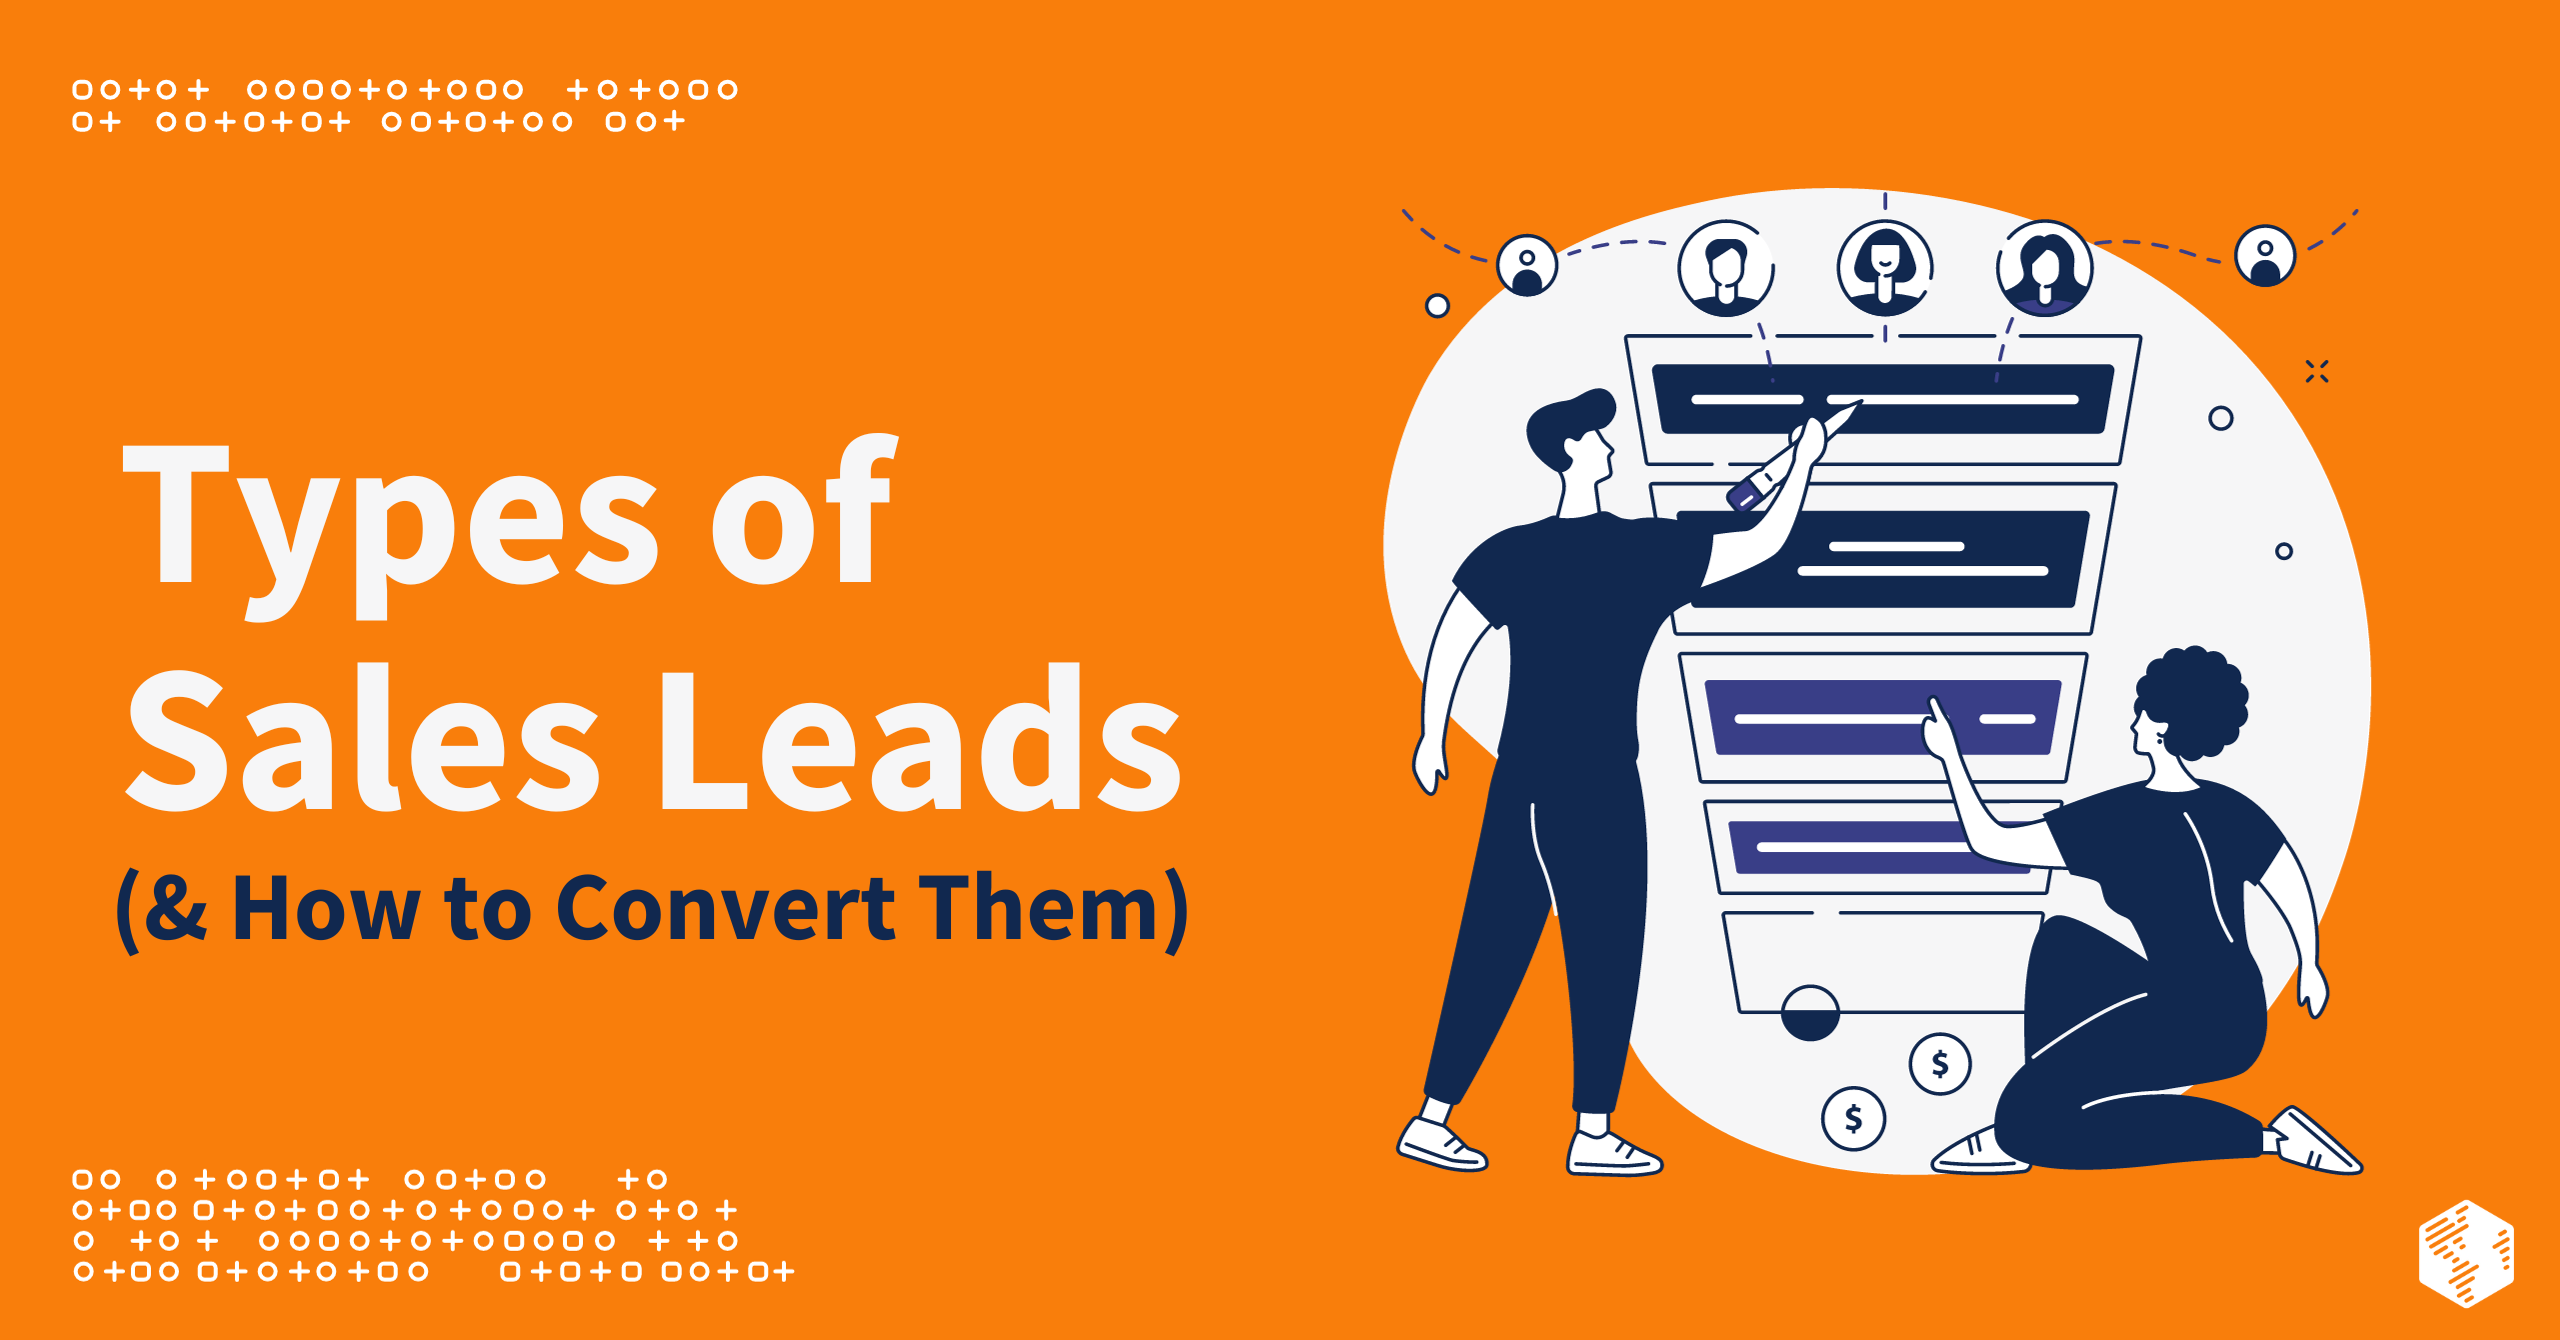 7 Types of Sales Leads (& How to Convert Them)